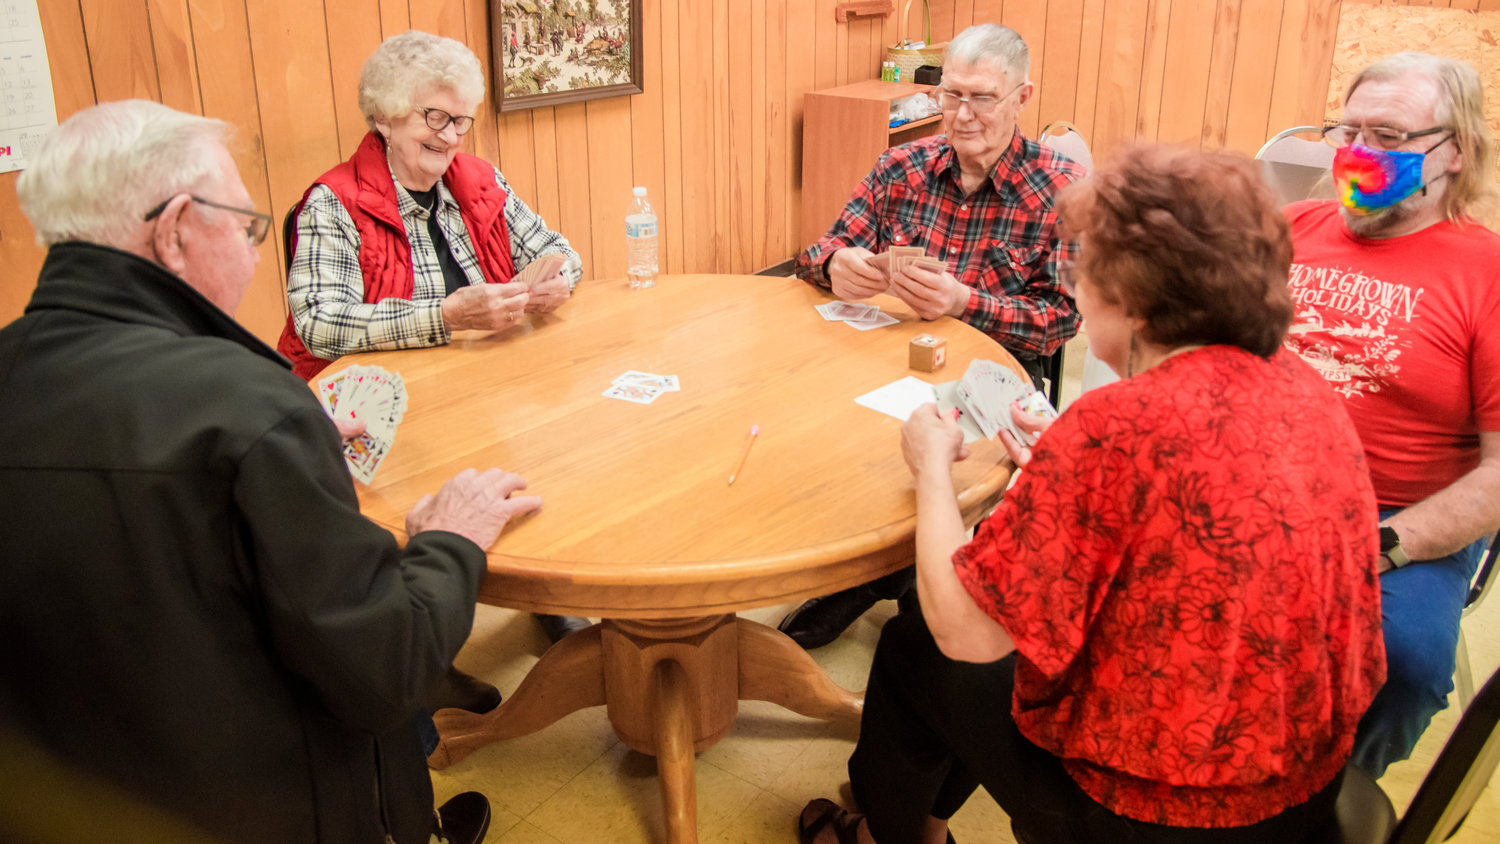 Visitors play cards at the Morton Senior Center located at 103 Westlake Avenue in Morton on Wednesday.